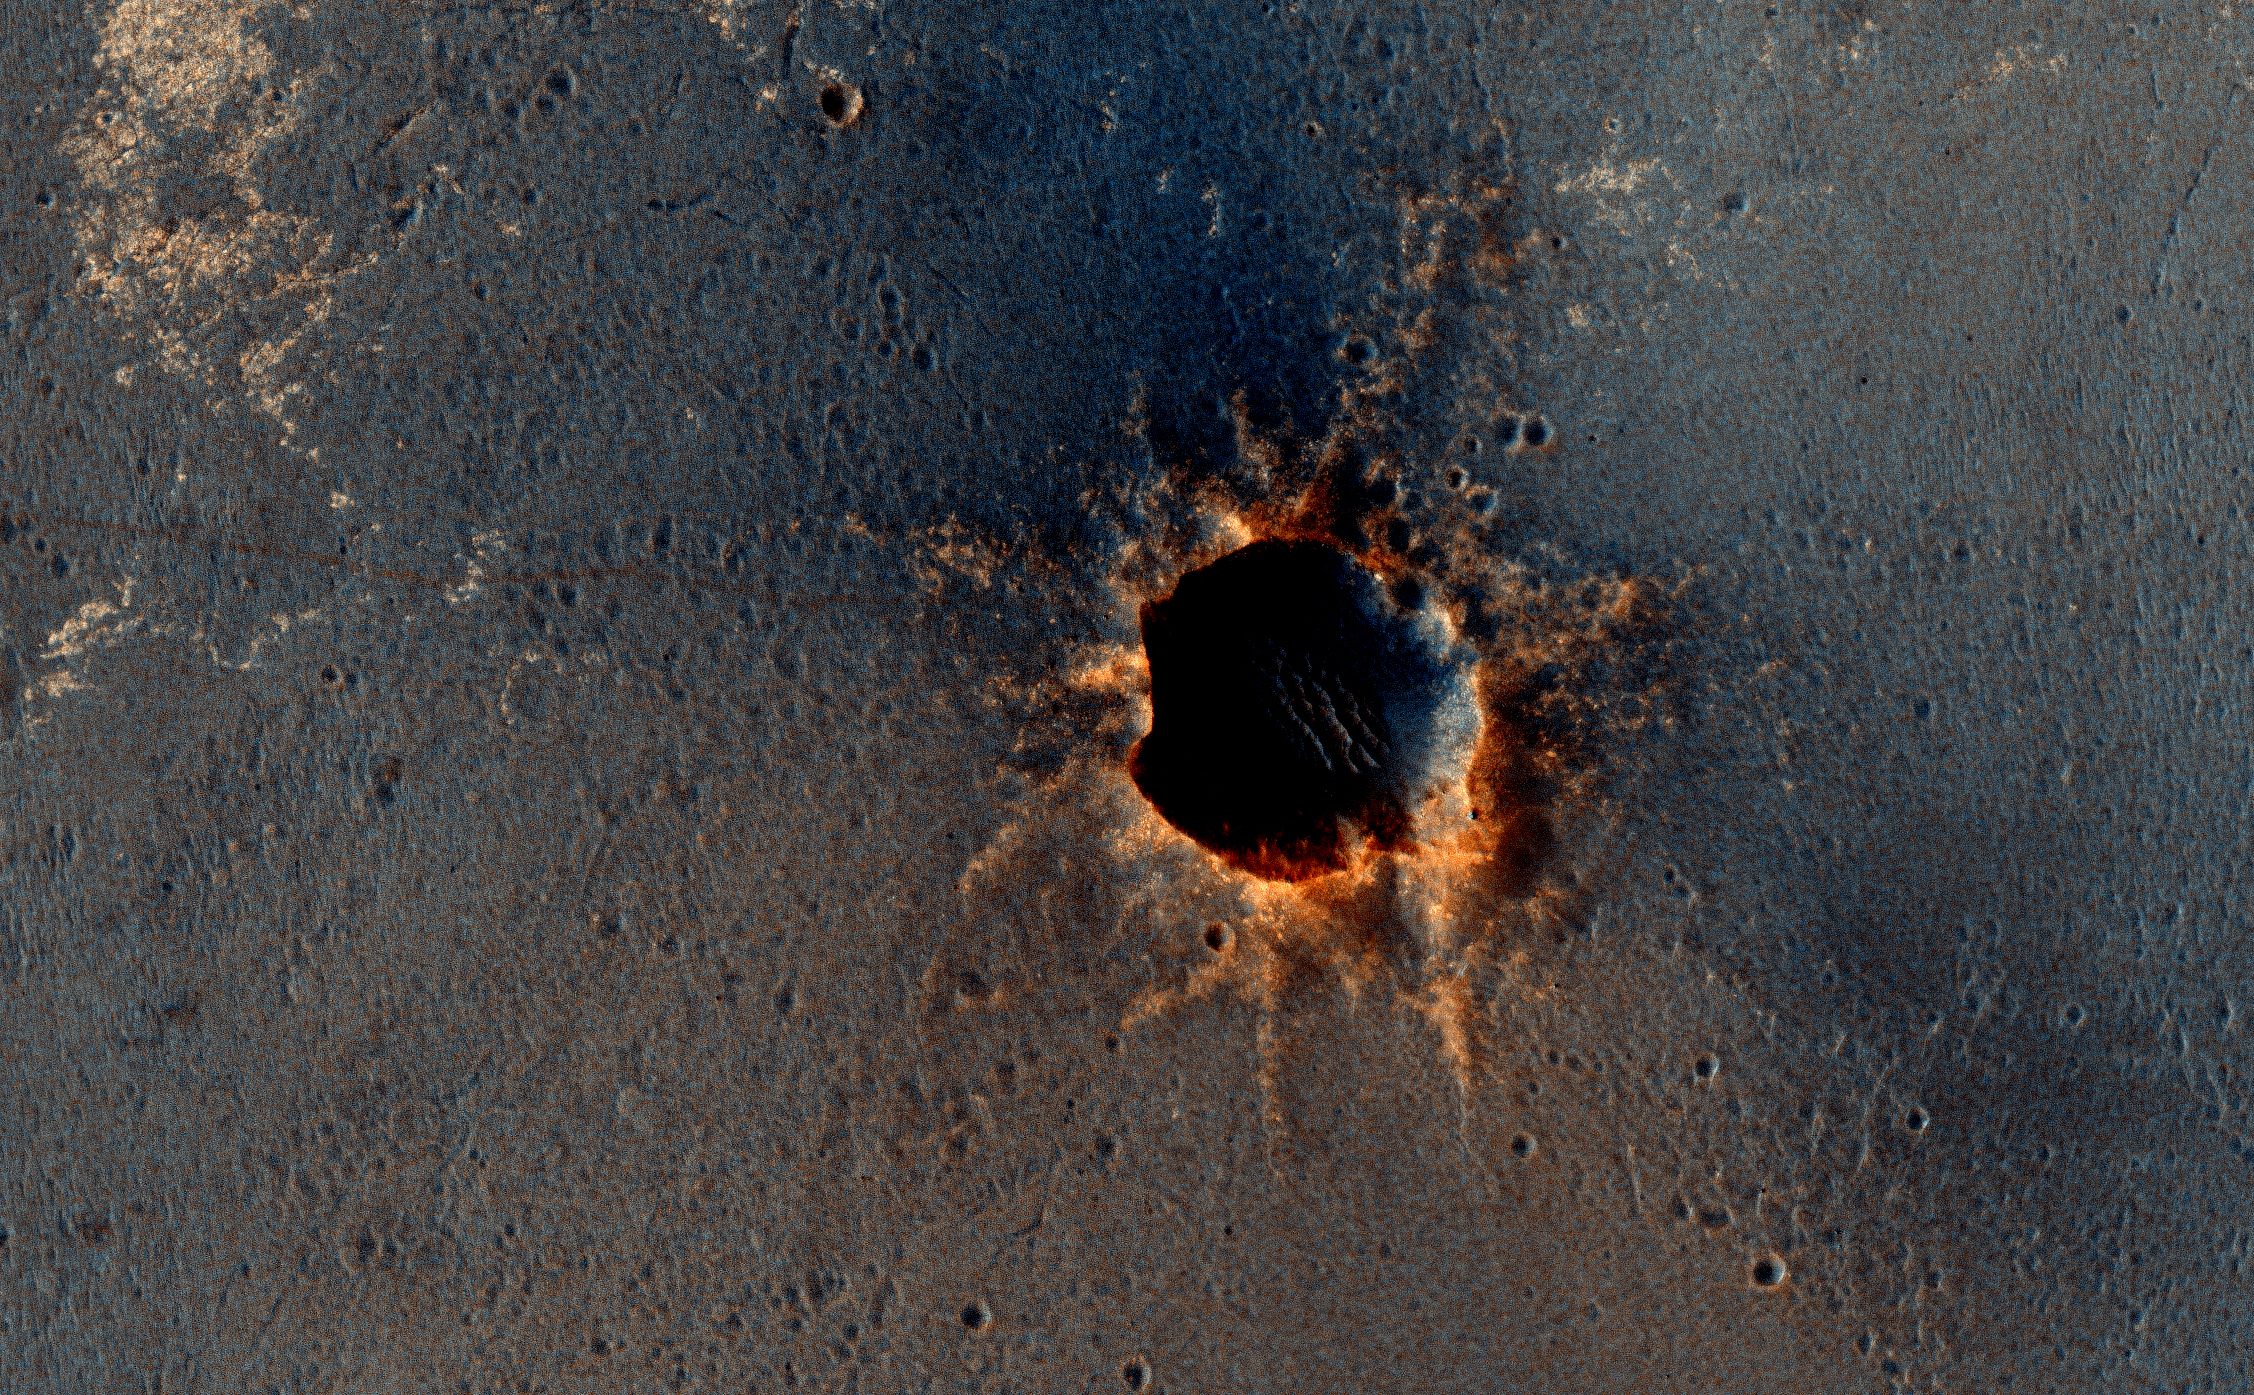 The High Resolution Imaging Science Experiment (HiRISE) camera on NASA's Mars Reconnaissance Orbiter acquired this color image on March 9, 2011, of &amp;quot;Santa Maria&amp;quot; crater, showing NASA's Mars Exploration Rover Opportunity perched on the southeast rim.